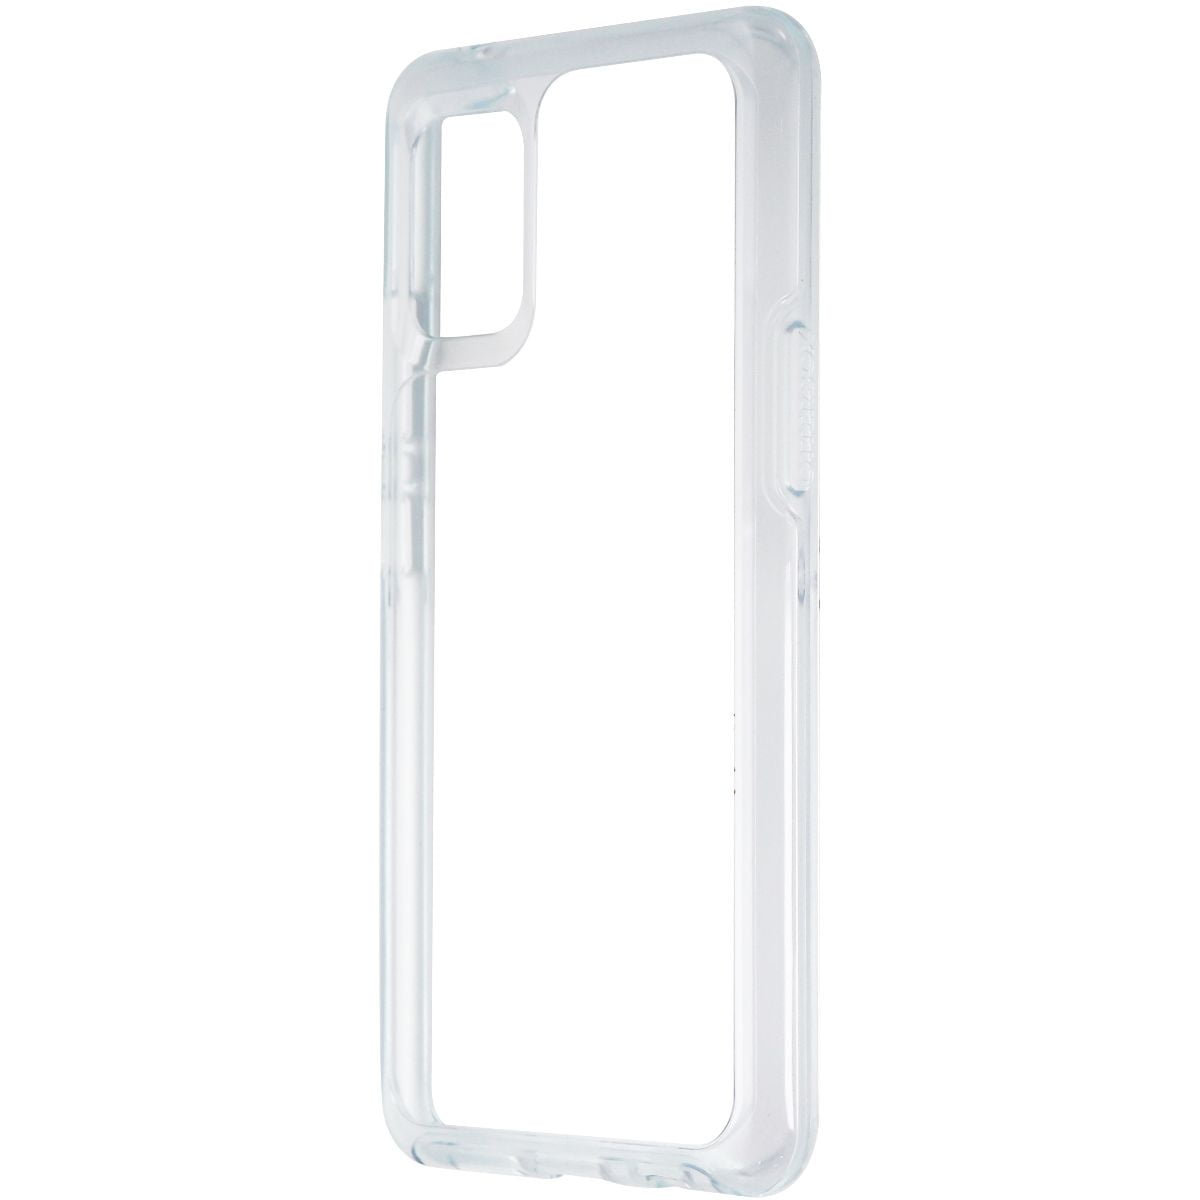 CLEAR OTTERBOX SYMMETRY CLEAR SERIES Case for Samsung Galaxy A51 Non 5G Version 